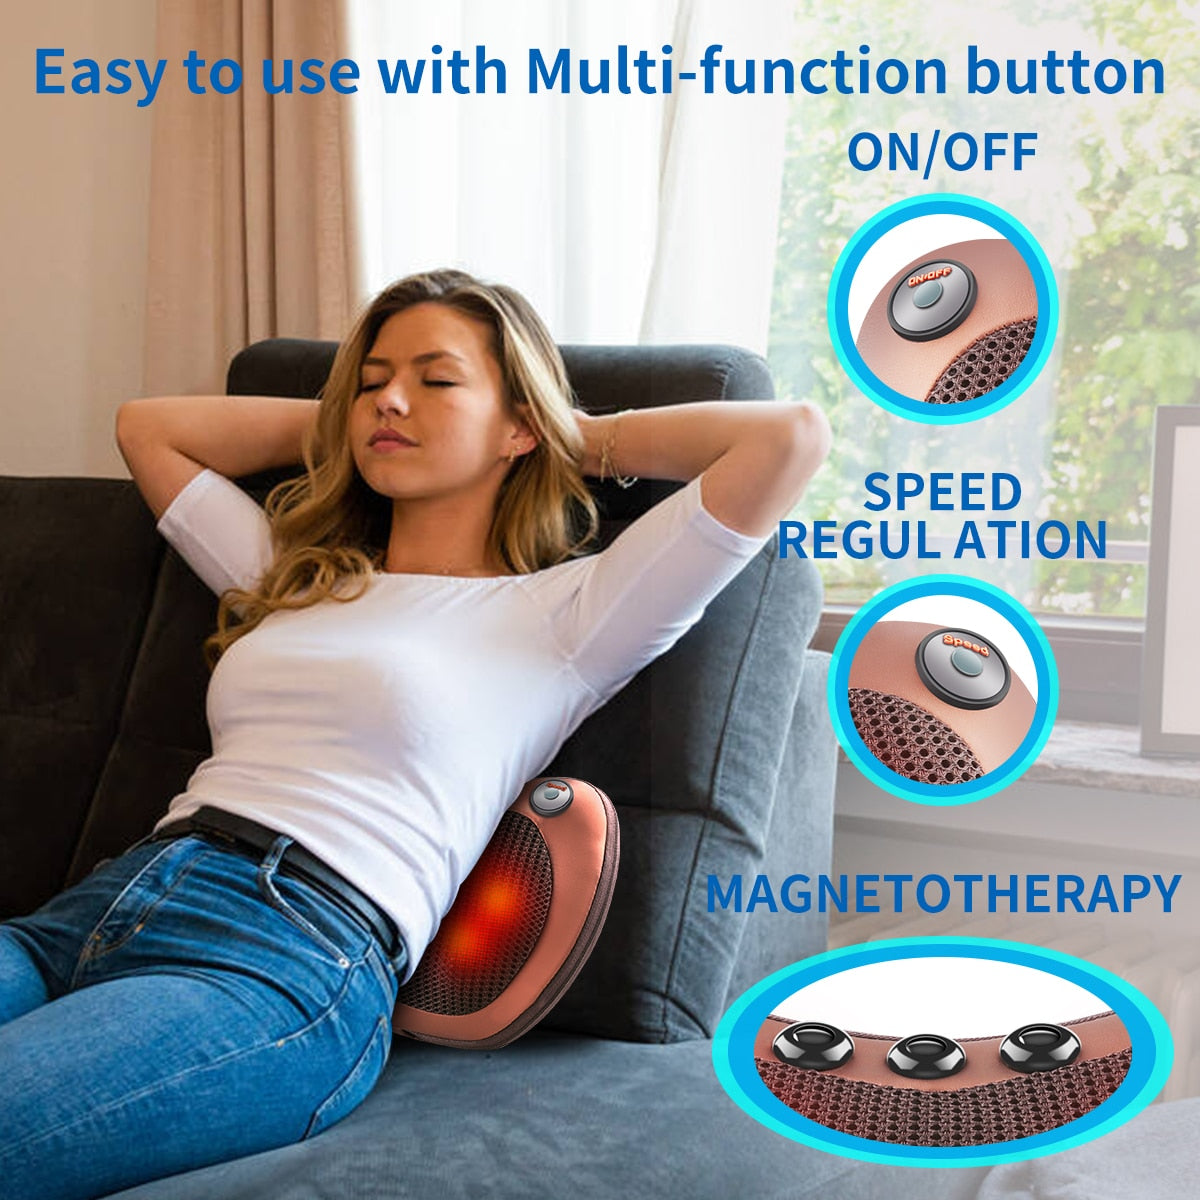 Massage pillow for back, neck and shoulders with heating / Electric roller massager